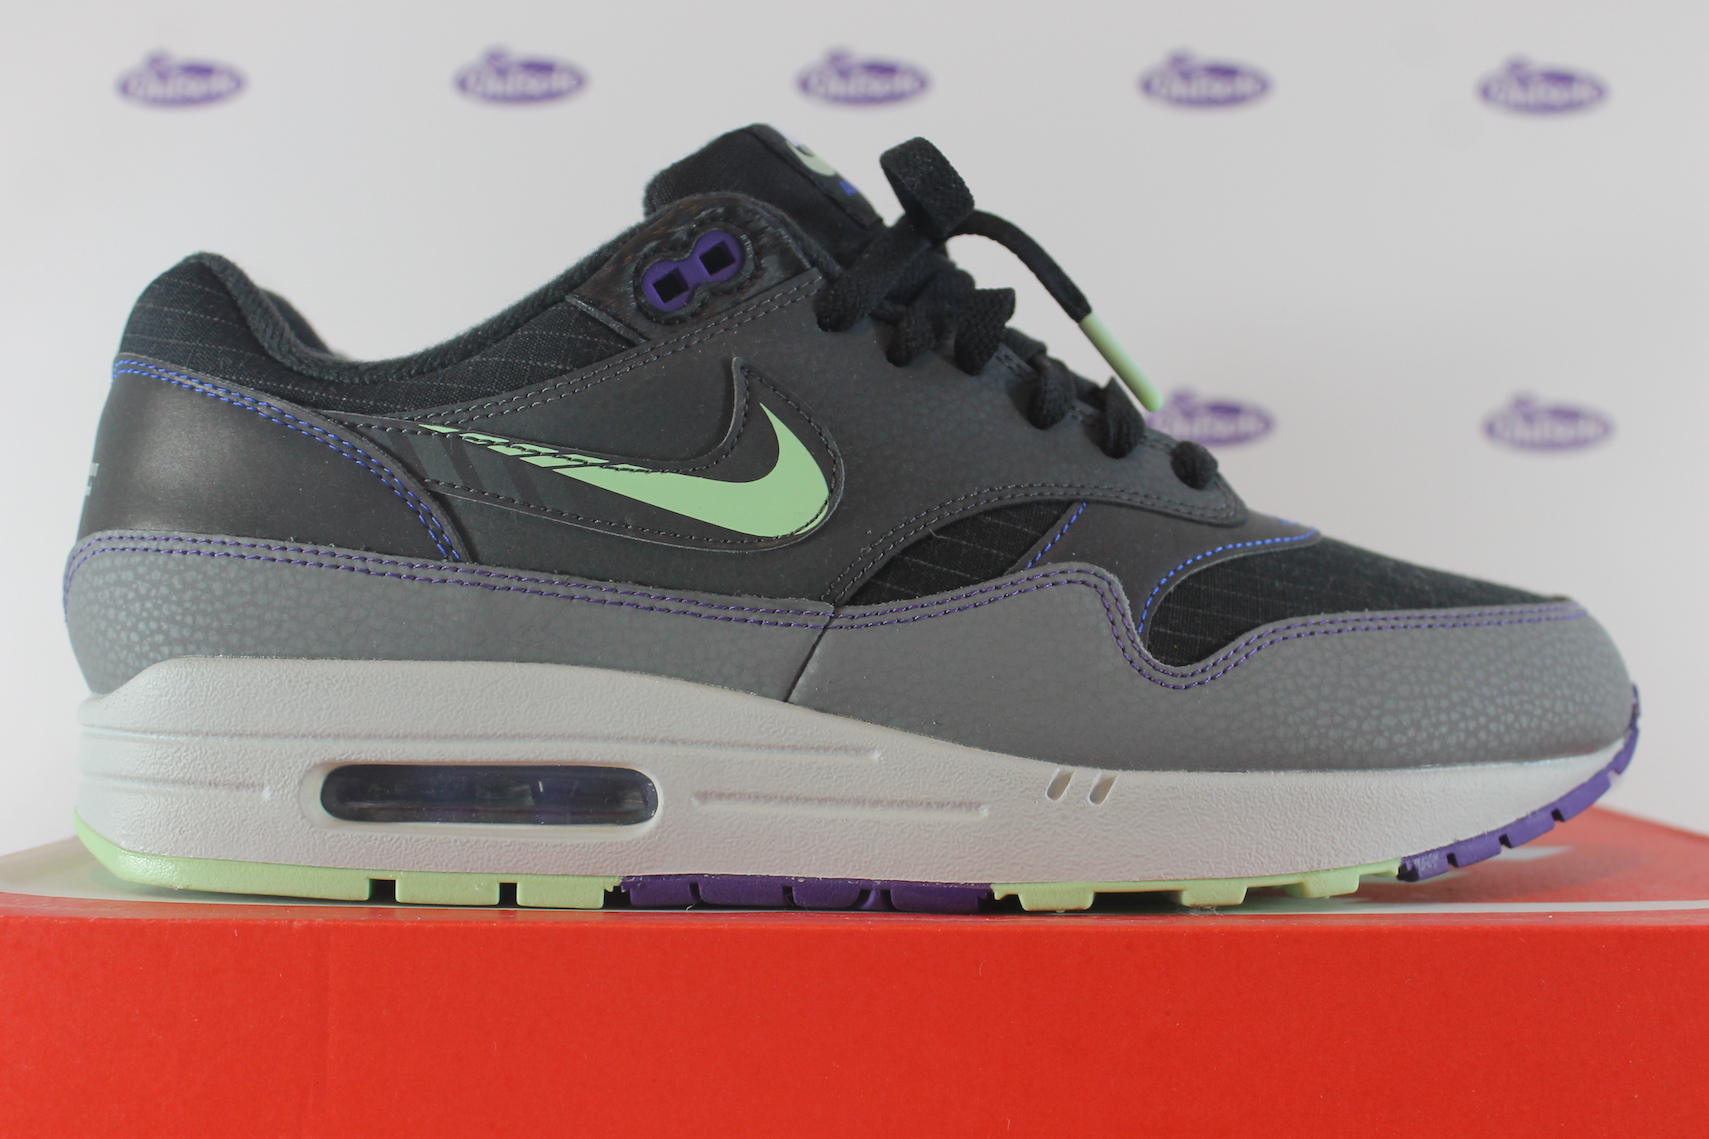 Ejecución mano pedir disculpas Nike Air Max 1 Future Swoosh Pack • ✓ In stock at Outsole